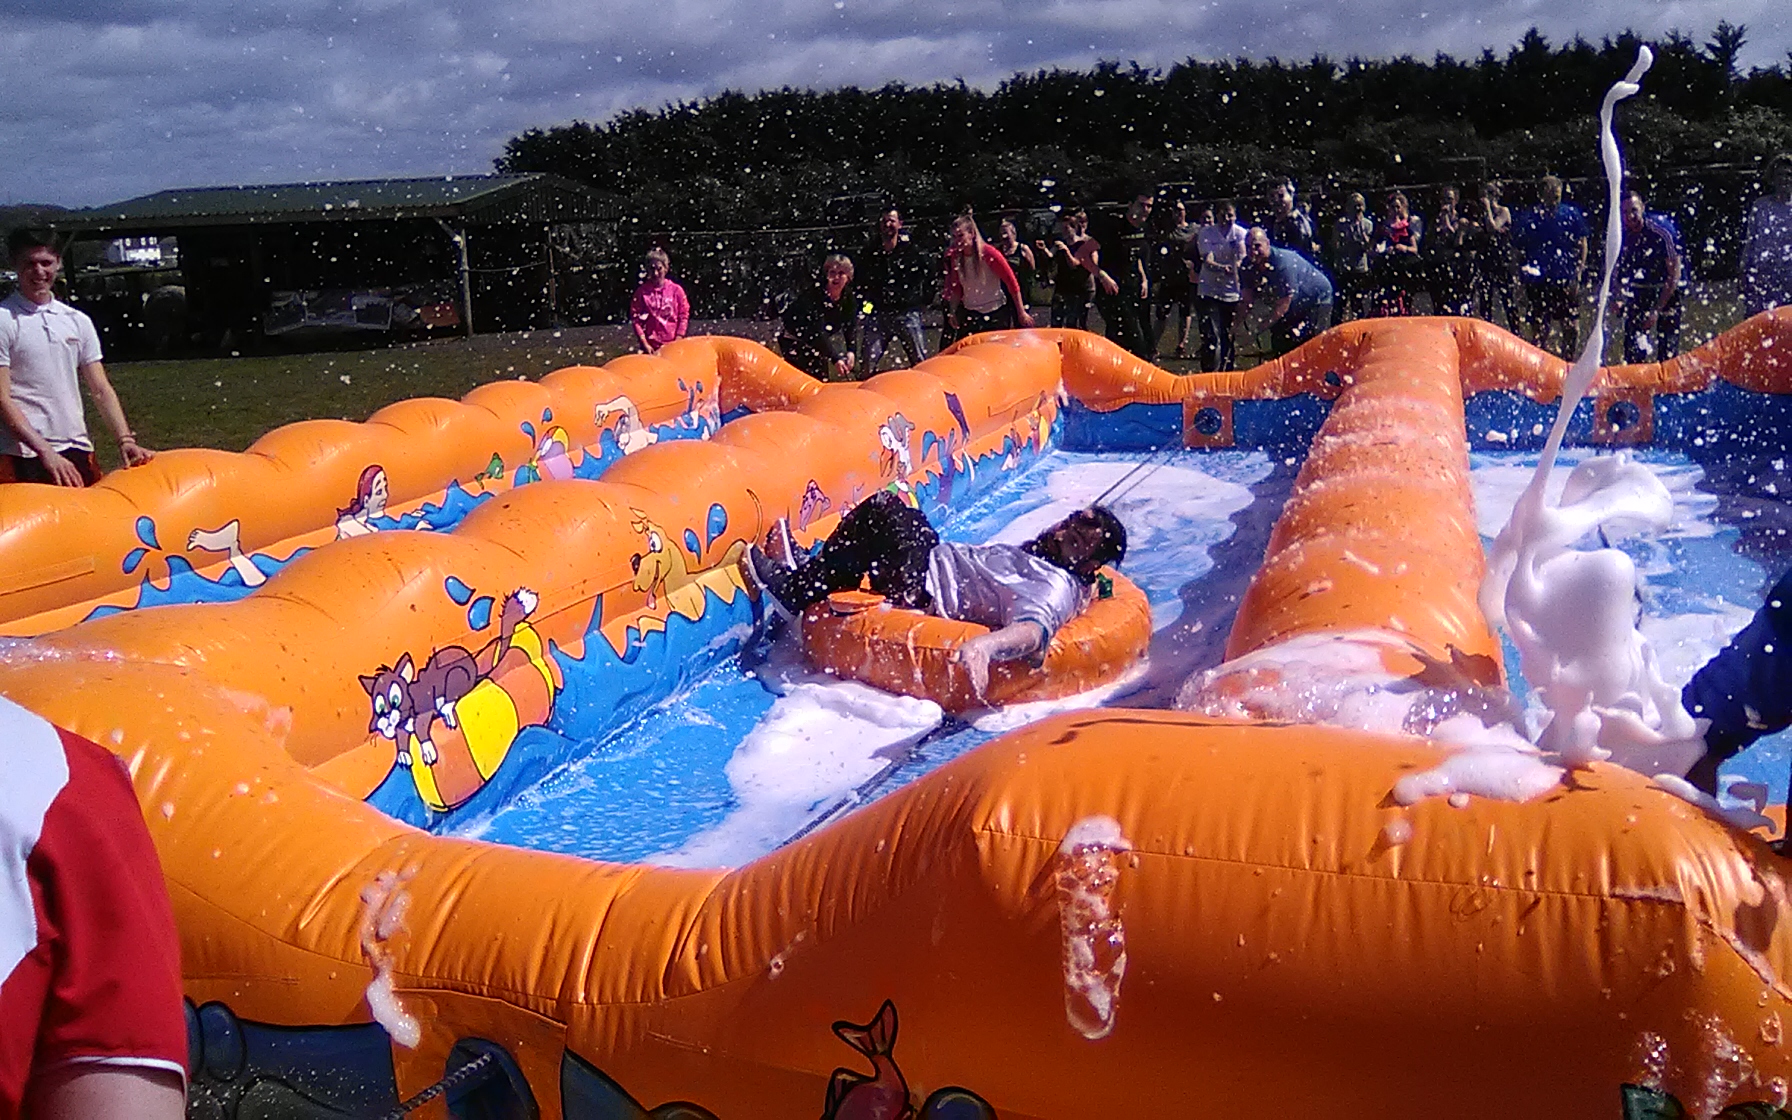 Ride on our ' All hands on deck ' in an awsome relay race , full of foam and fun !